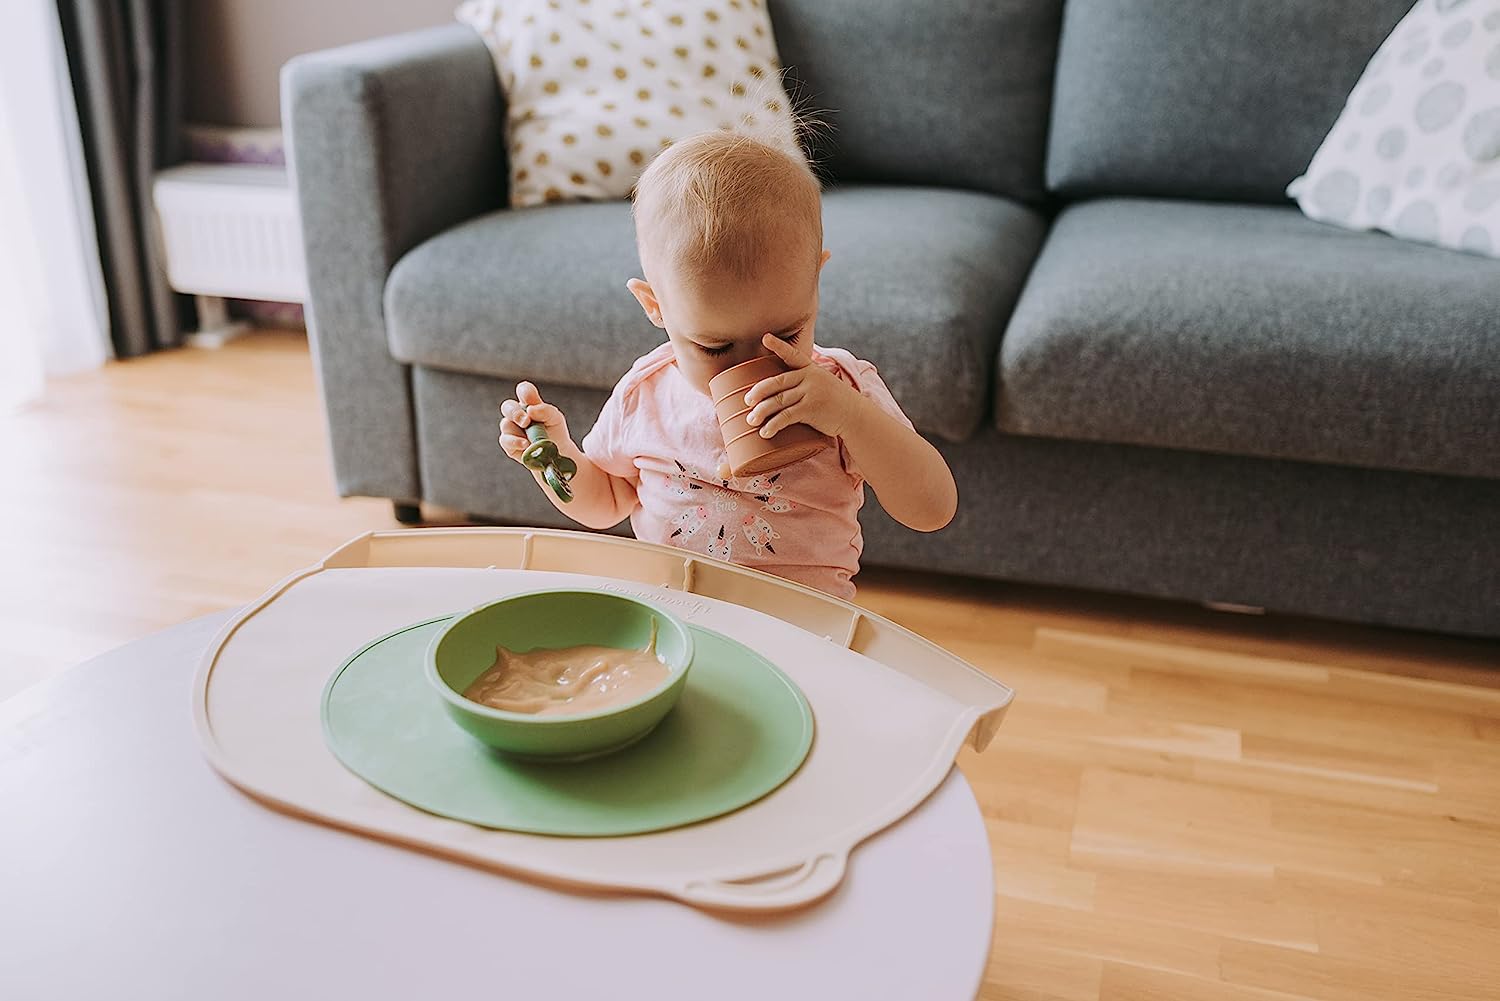  UpwardBaby Silicone Placemats for Kids Toddlers- Suction Baby  for Restaurants & Home with Food Catching Pockets for Dining Table-Washable  Wipeable Nonslip BPA-Free : Baby